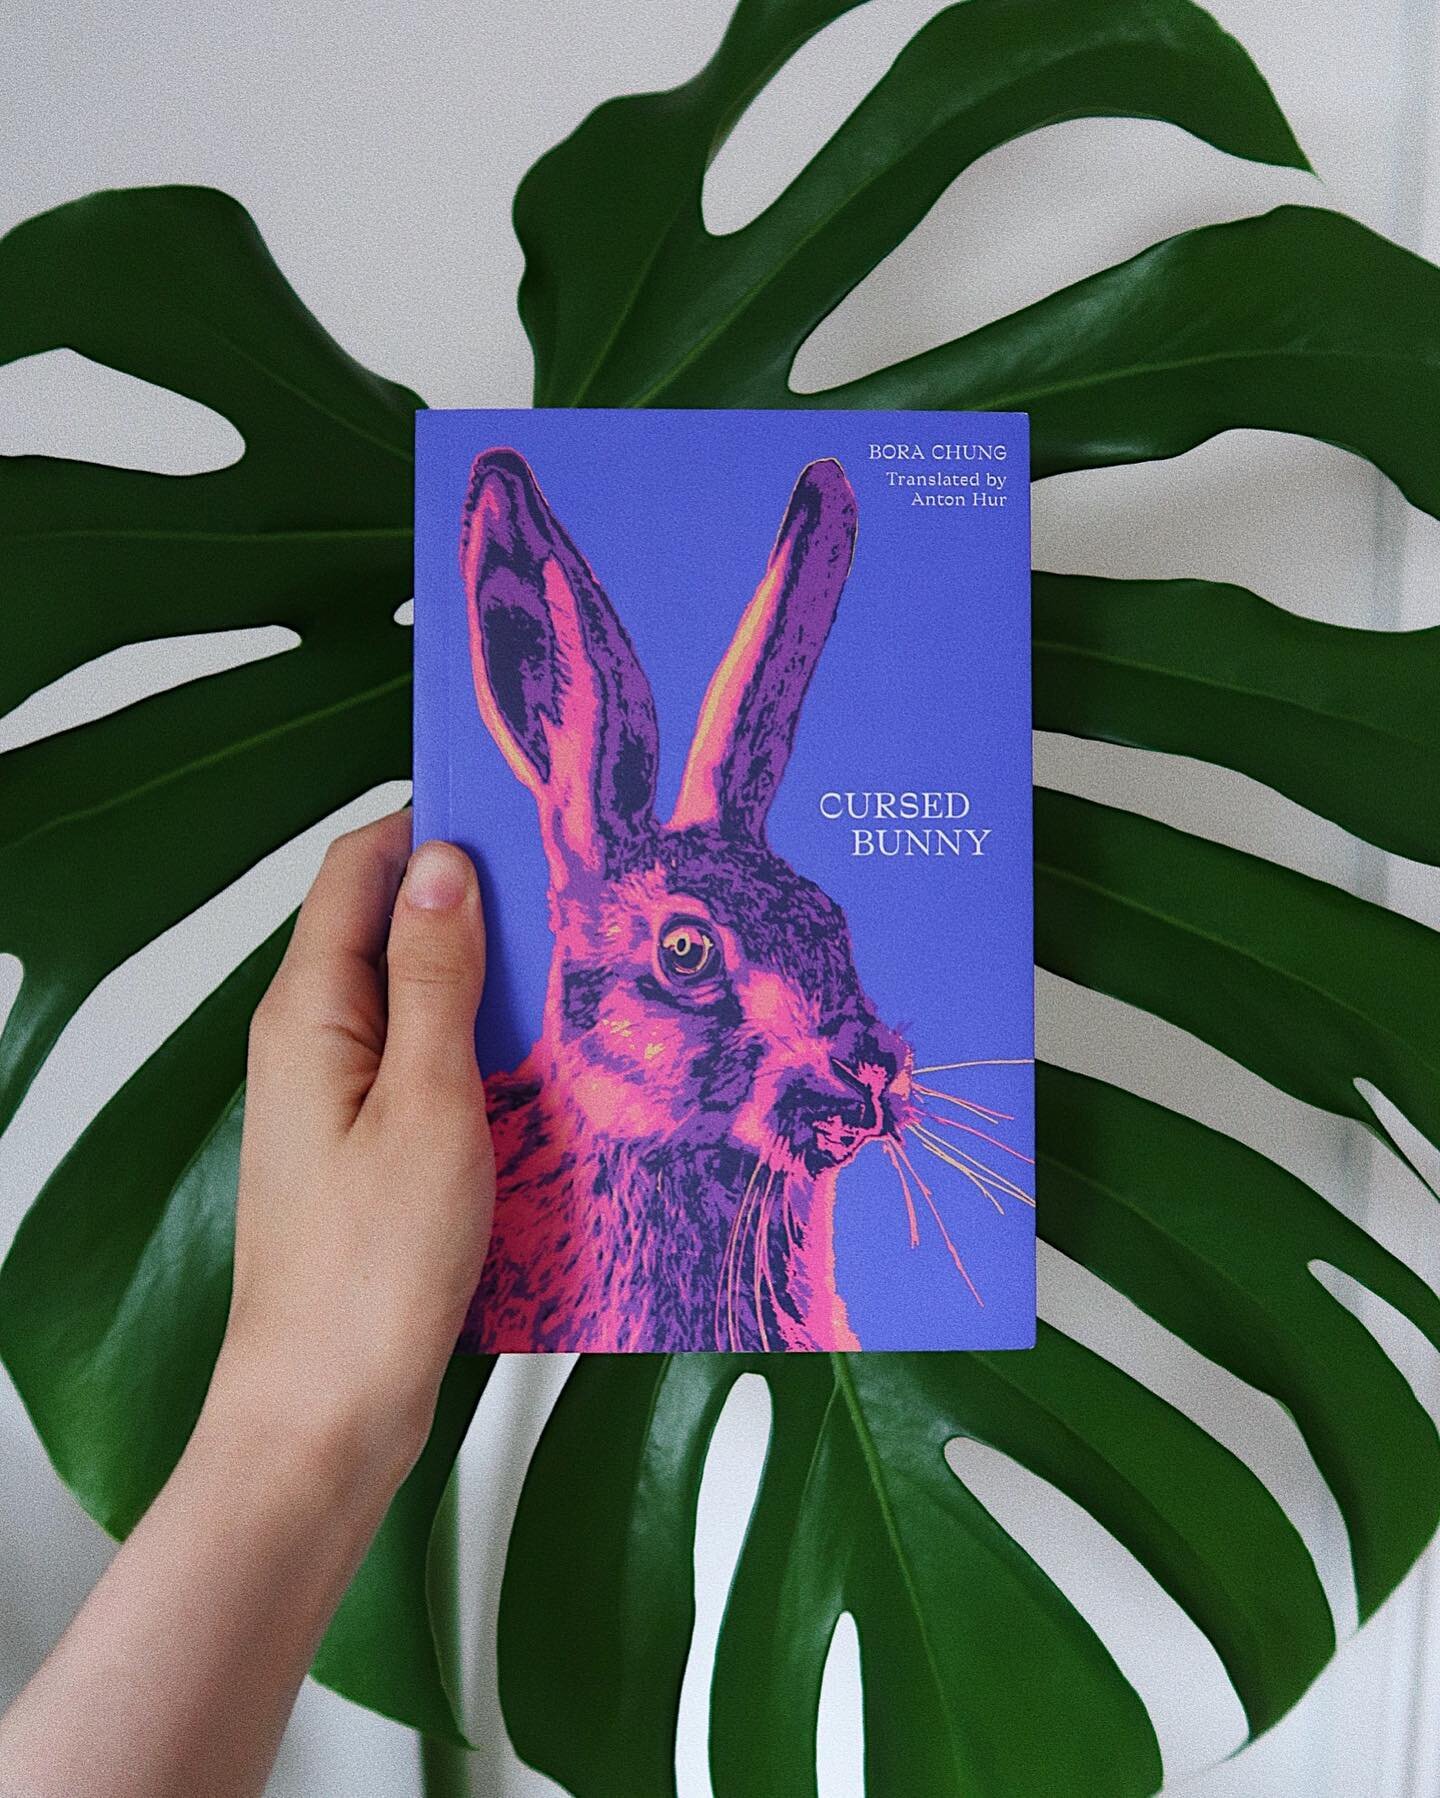 Overall Cursed Bunny was an ok/lightly enjoyable read. Some short stories I really enjoyed, others I could take or leave. Which I guess is the nature of short story collections. I would be interested to read one of her full length novels but I&rsquo;